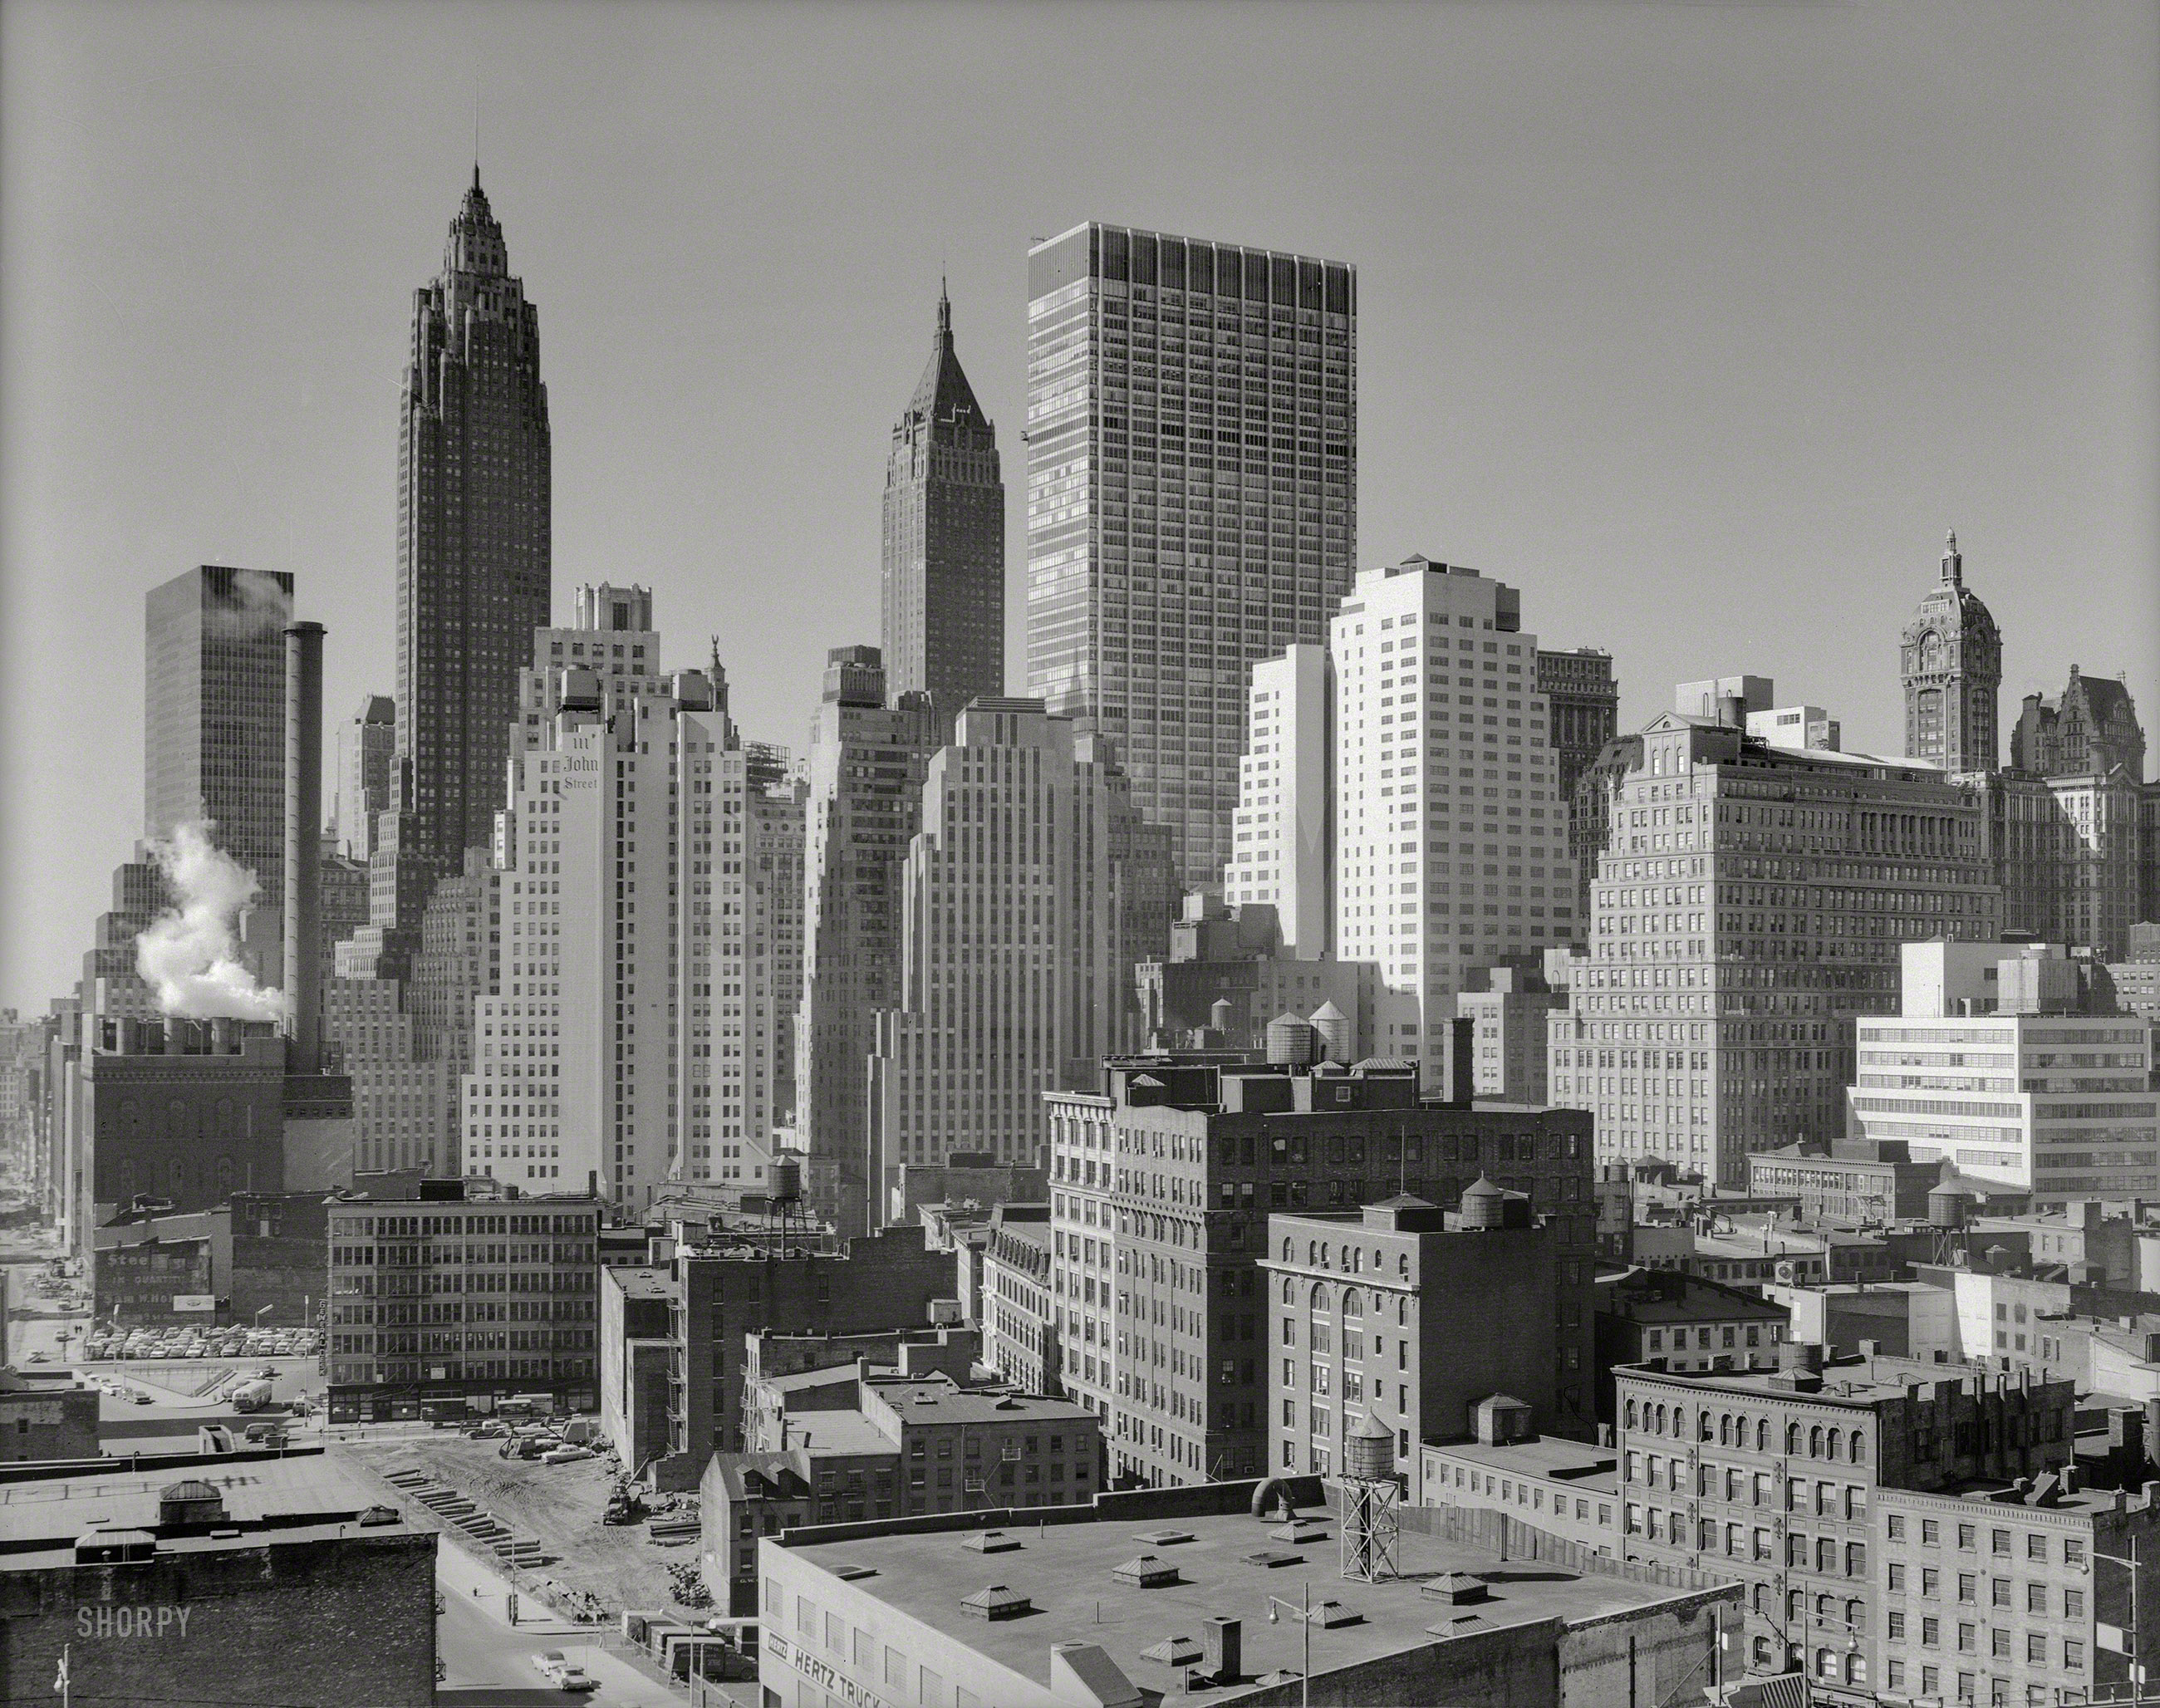 March 2, 1962. "New York City views. Downtown Manhattan skyline from the Al Smith houses." 4x5 acetate negative by Gottscho-Schleisner. View full size.